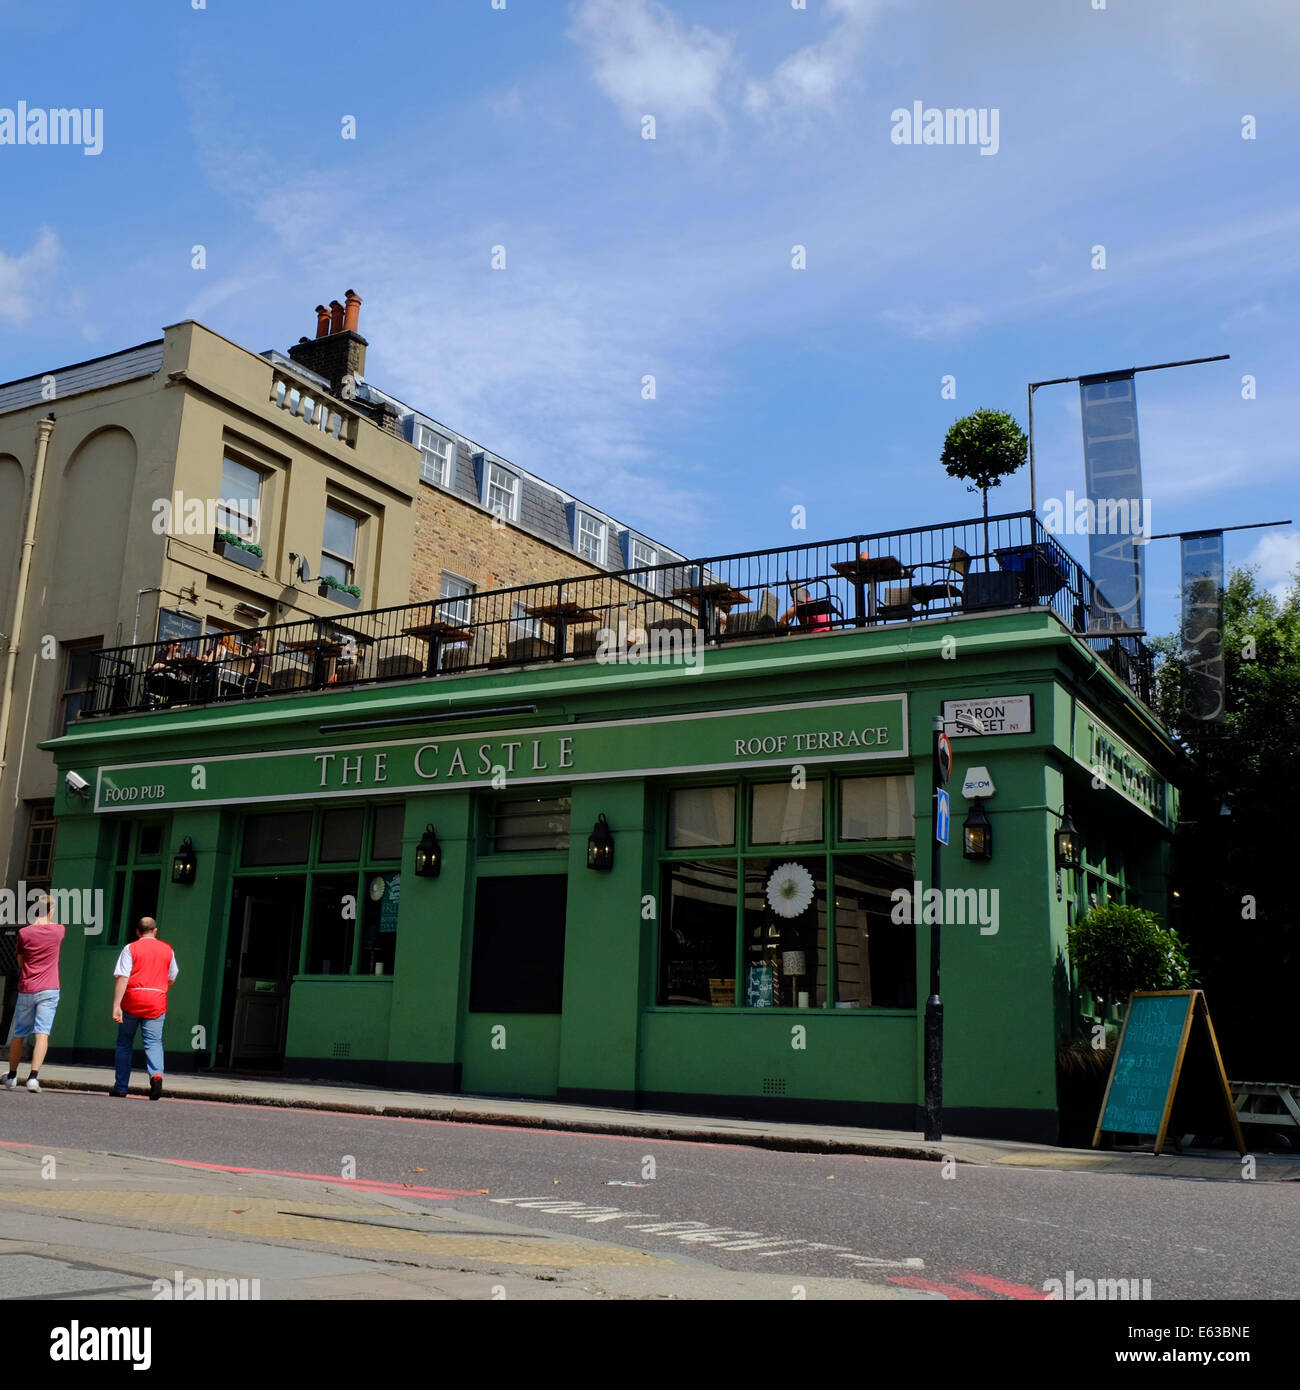 The Castle Pub High Resolution Stock Photography and Images - Alamy